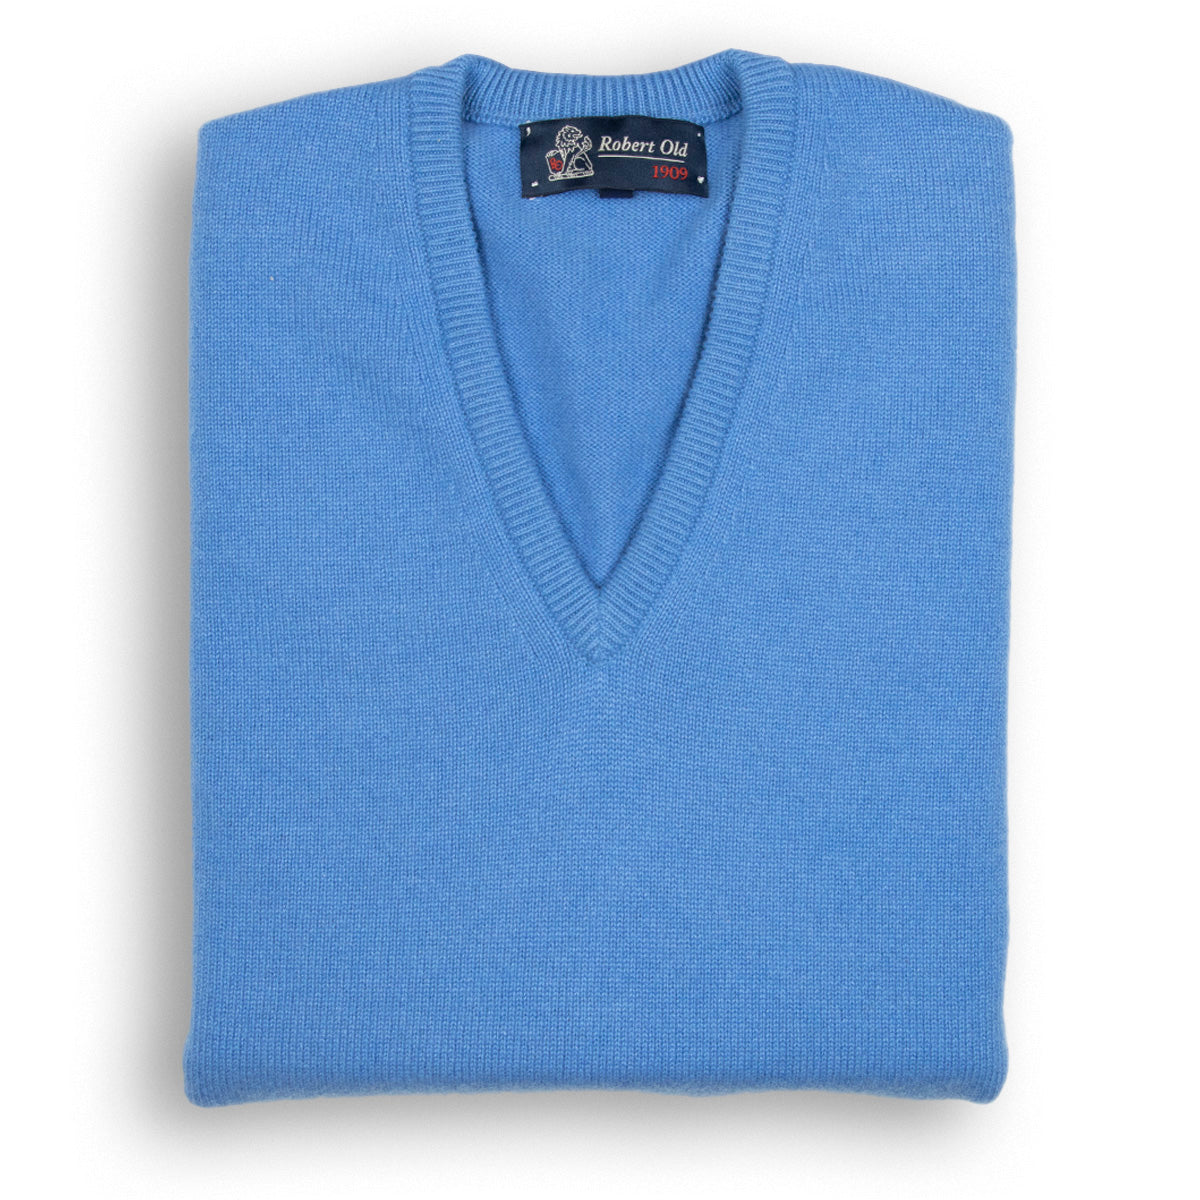 Isfahan Blue Tobermorey 4ply V-Neck Cashmere Sweater  Robert Old   